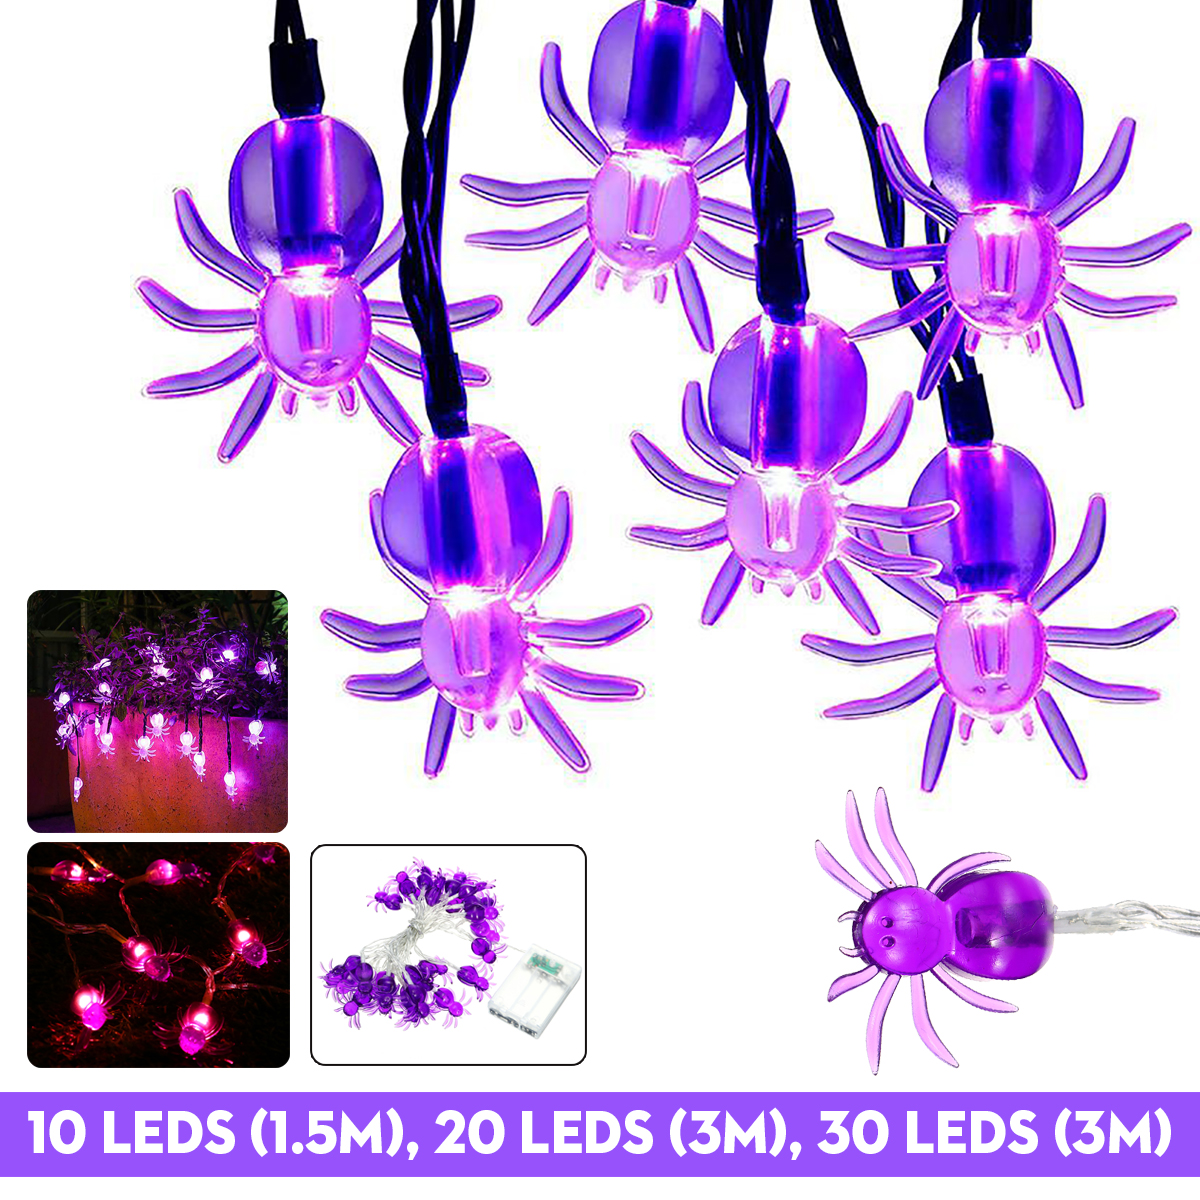 15M3M-Halloween-LED-Spider-String-Fairy-Light-Party-Night-Hanging-Lamp-Home-Decor-1742754-1